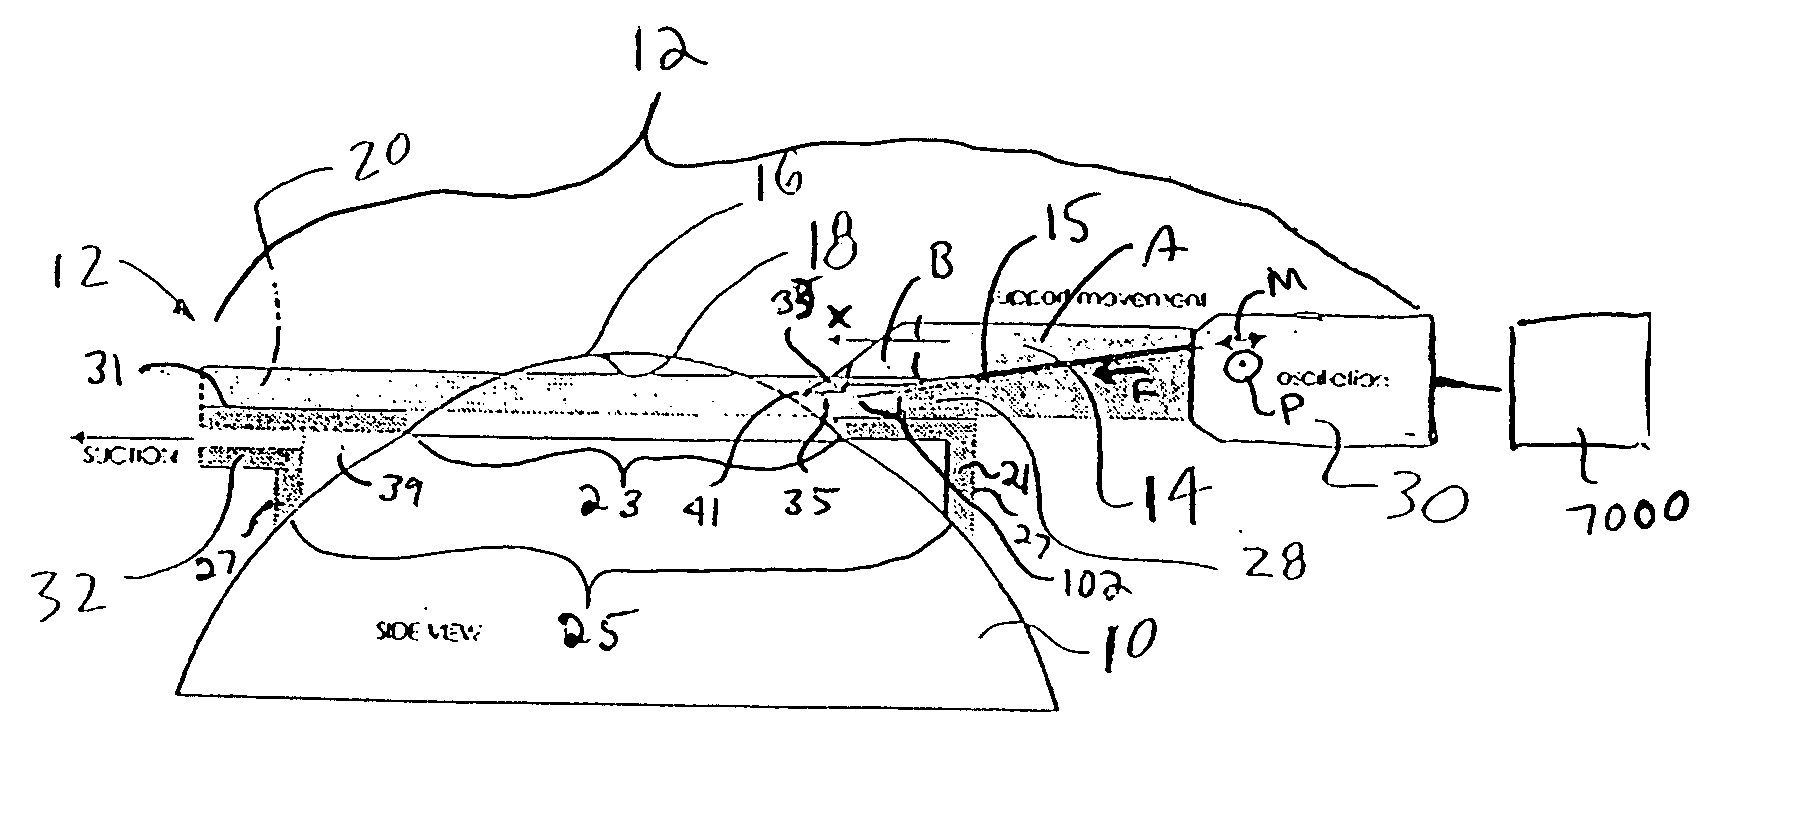 Device for separating the epithelial layer from the surface of the cornea of an eye